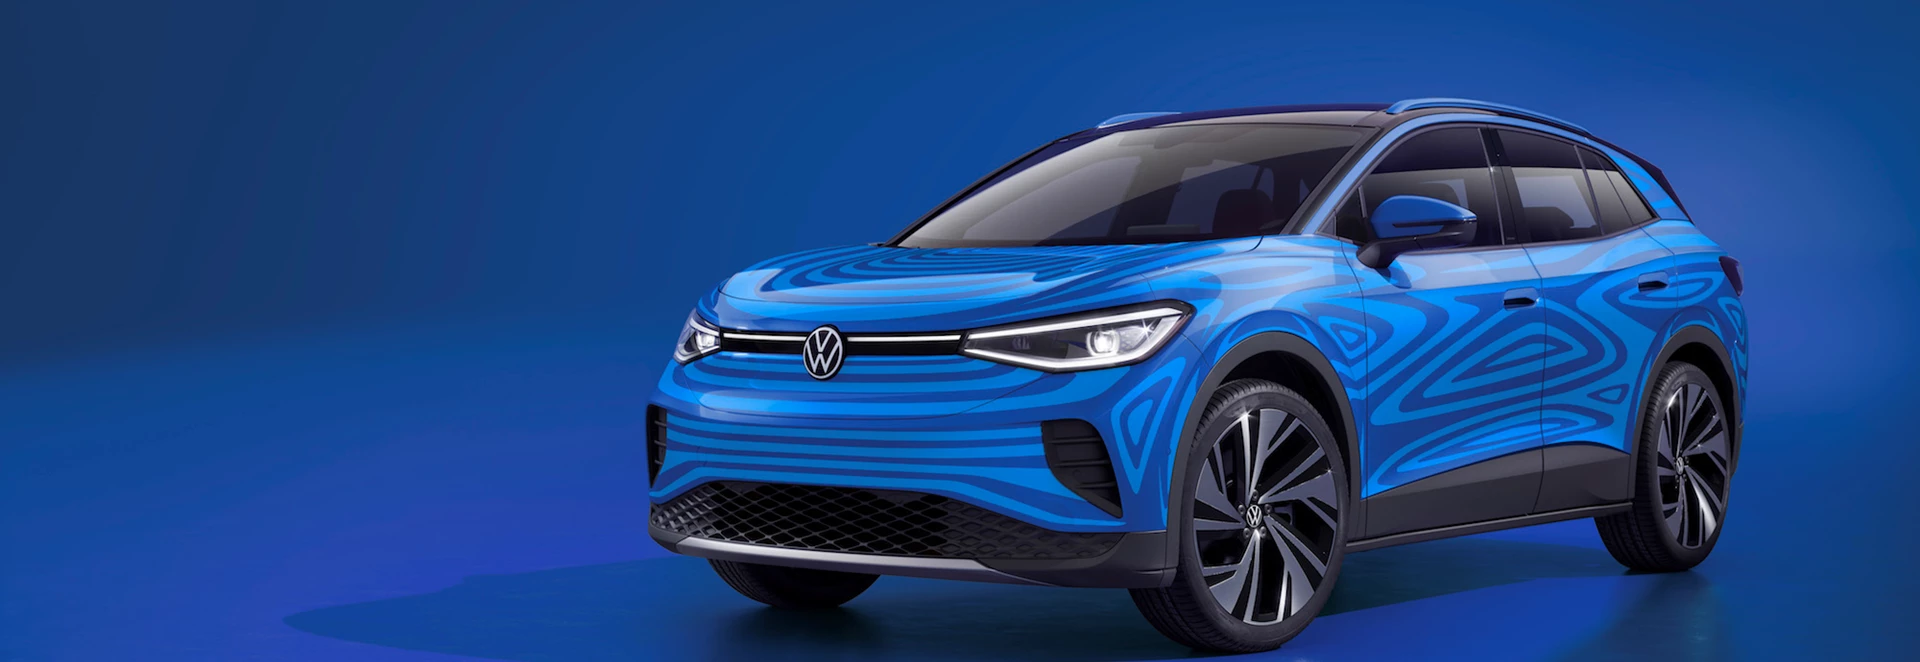 Further details confirmed for 2021 Volkswagen ID.4 electric SUV